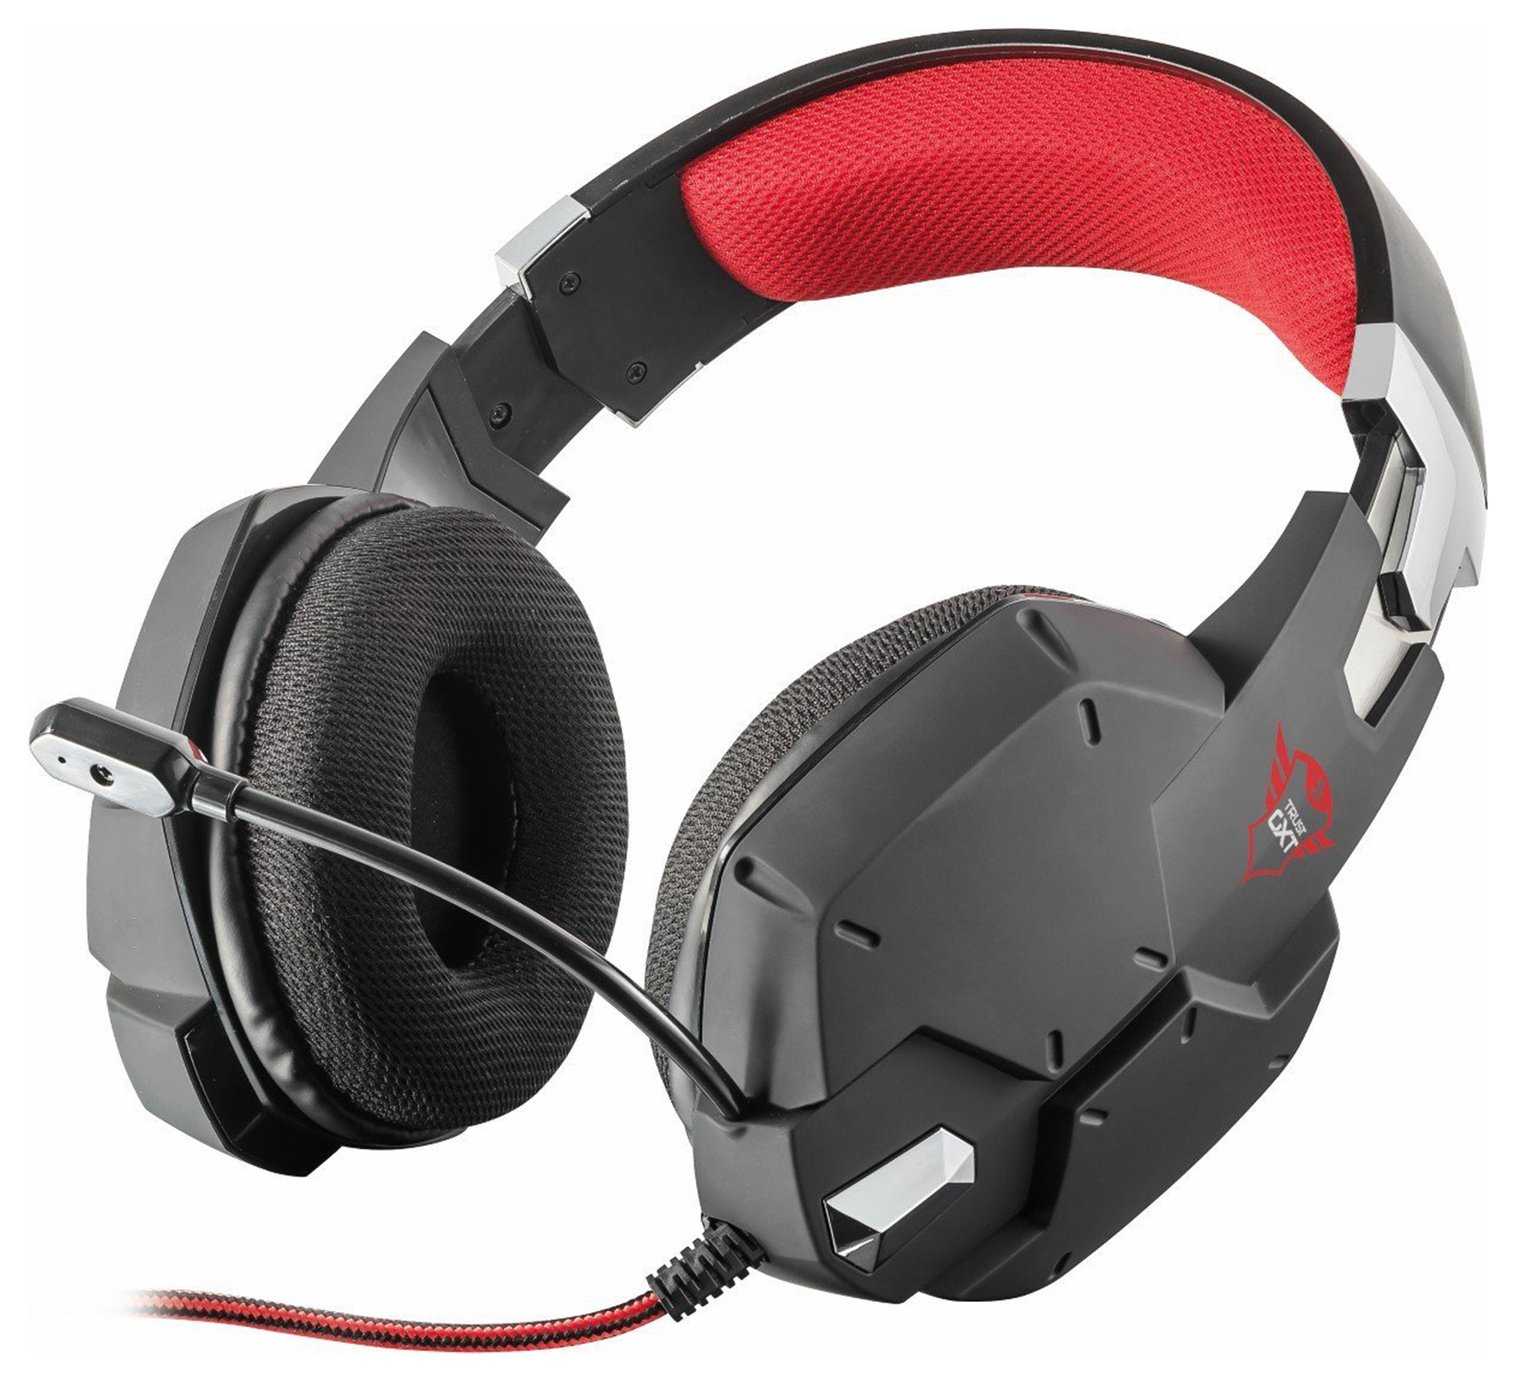 Trust GXT 322 Carus Gaming Headset - Black